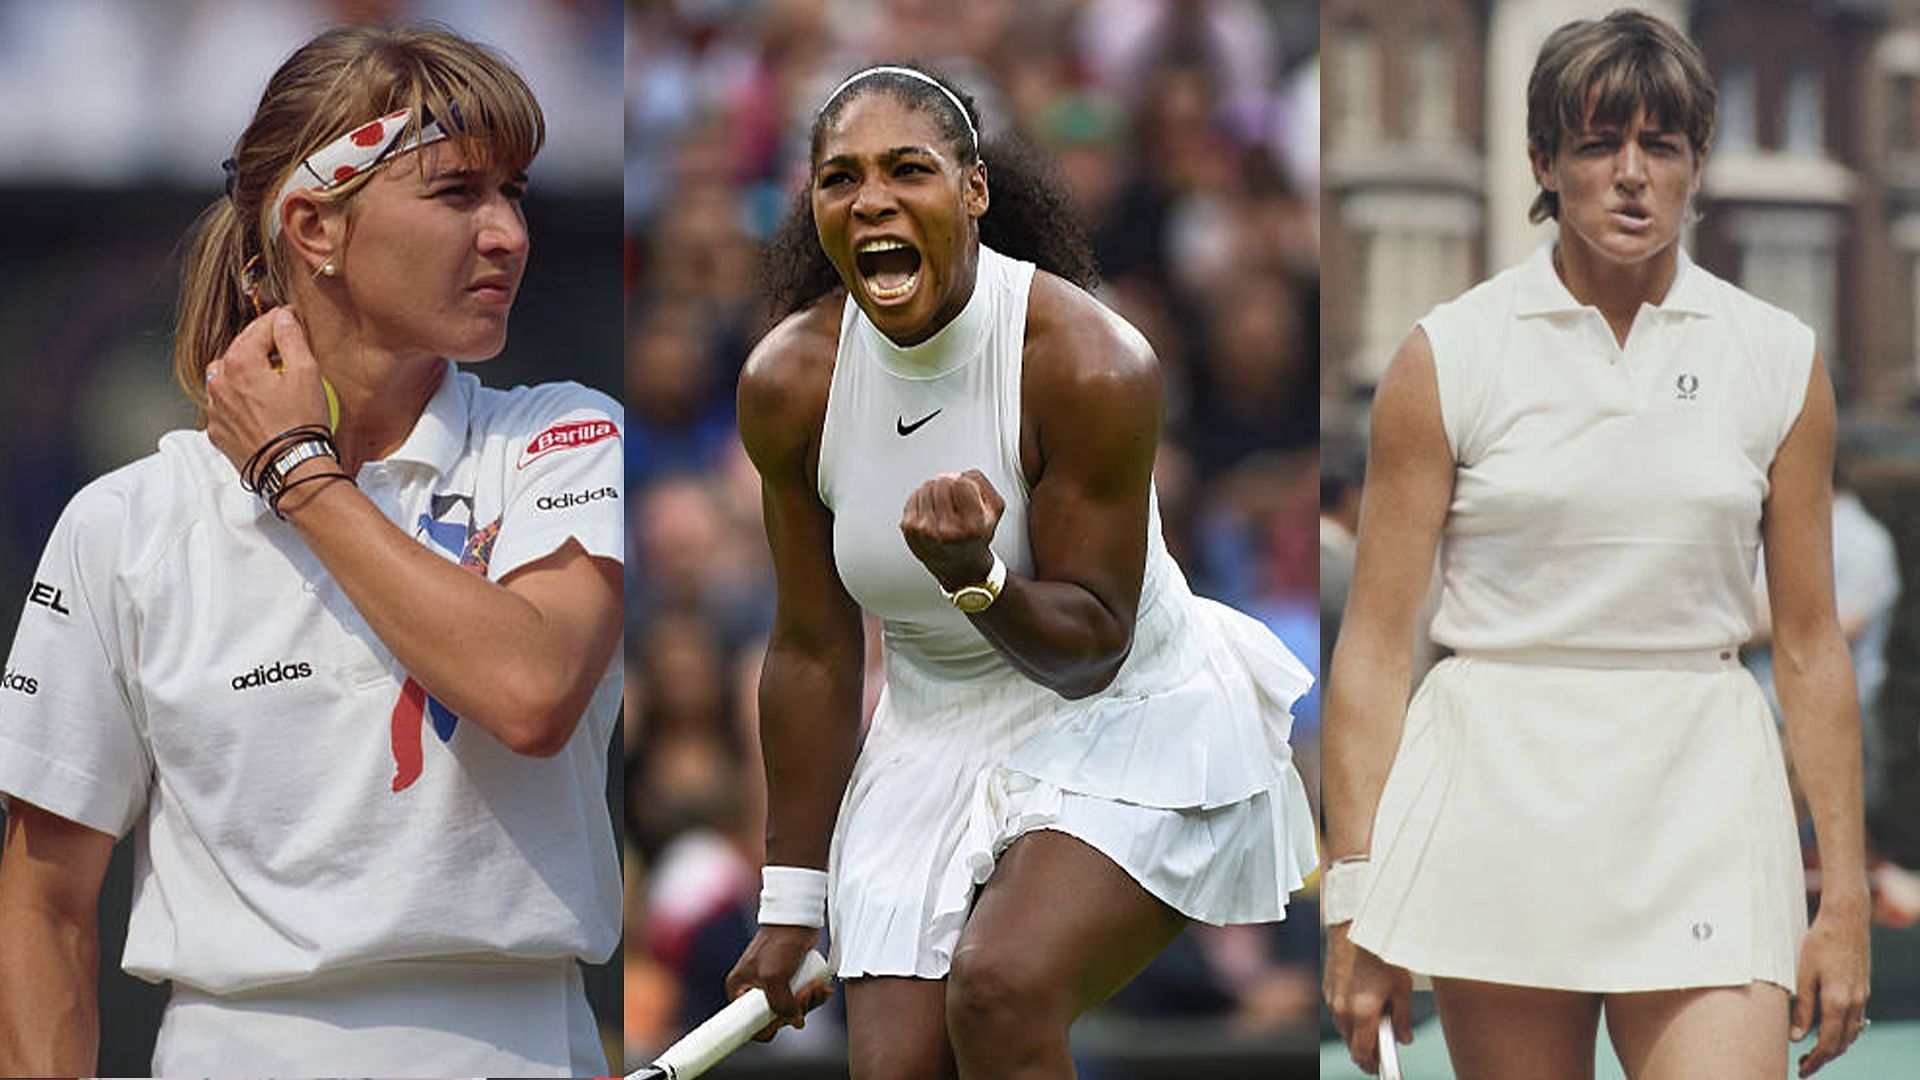 Will Serena Williams go down as the GOAT over Steffi Graf and Margaret Court?